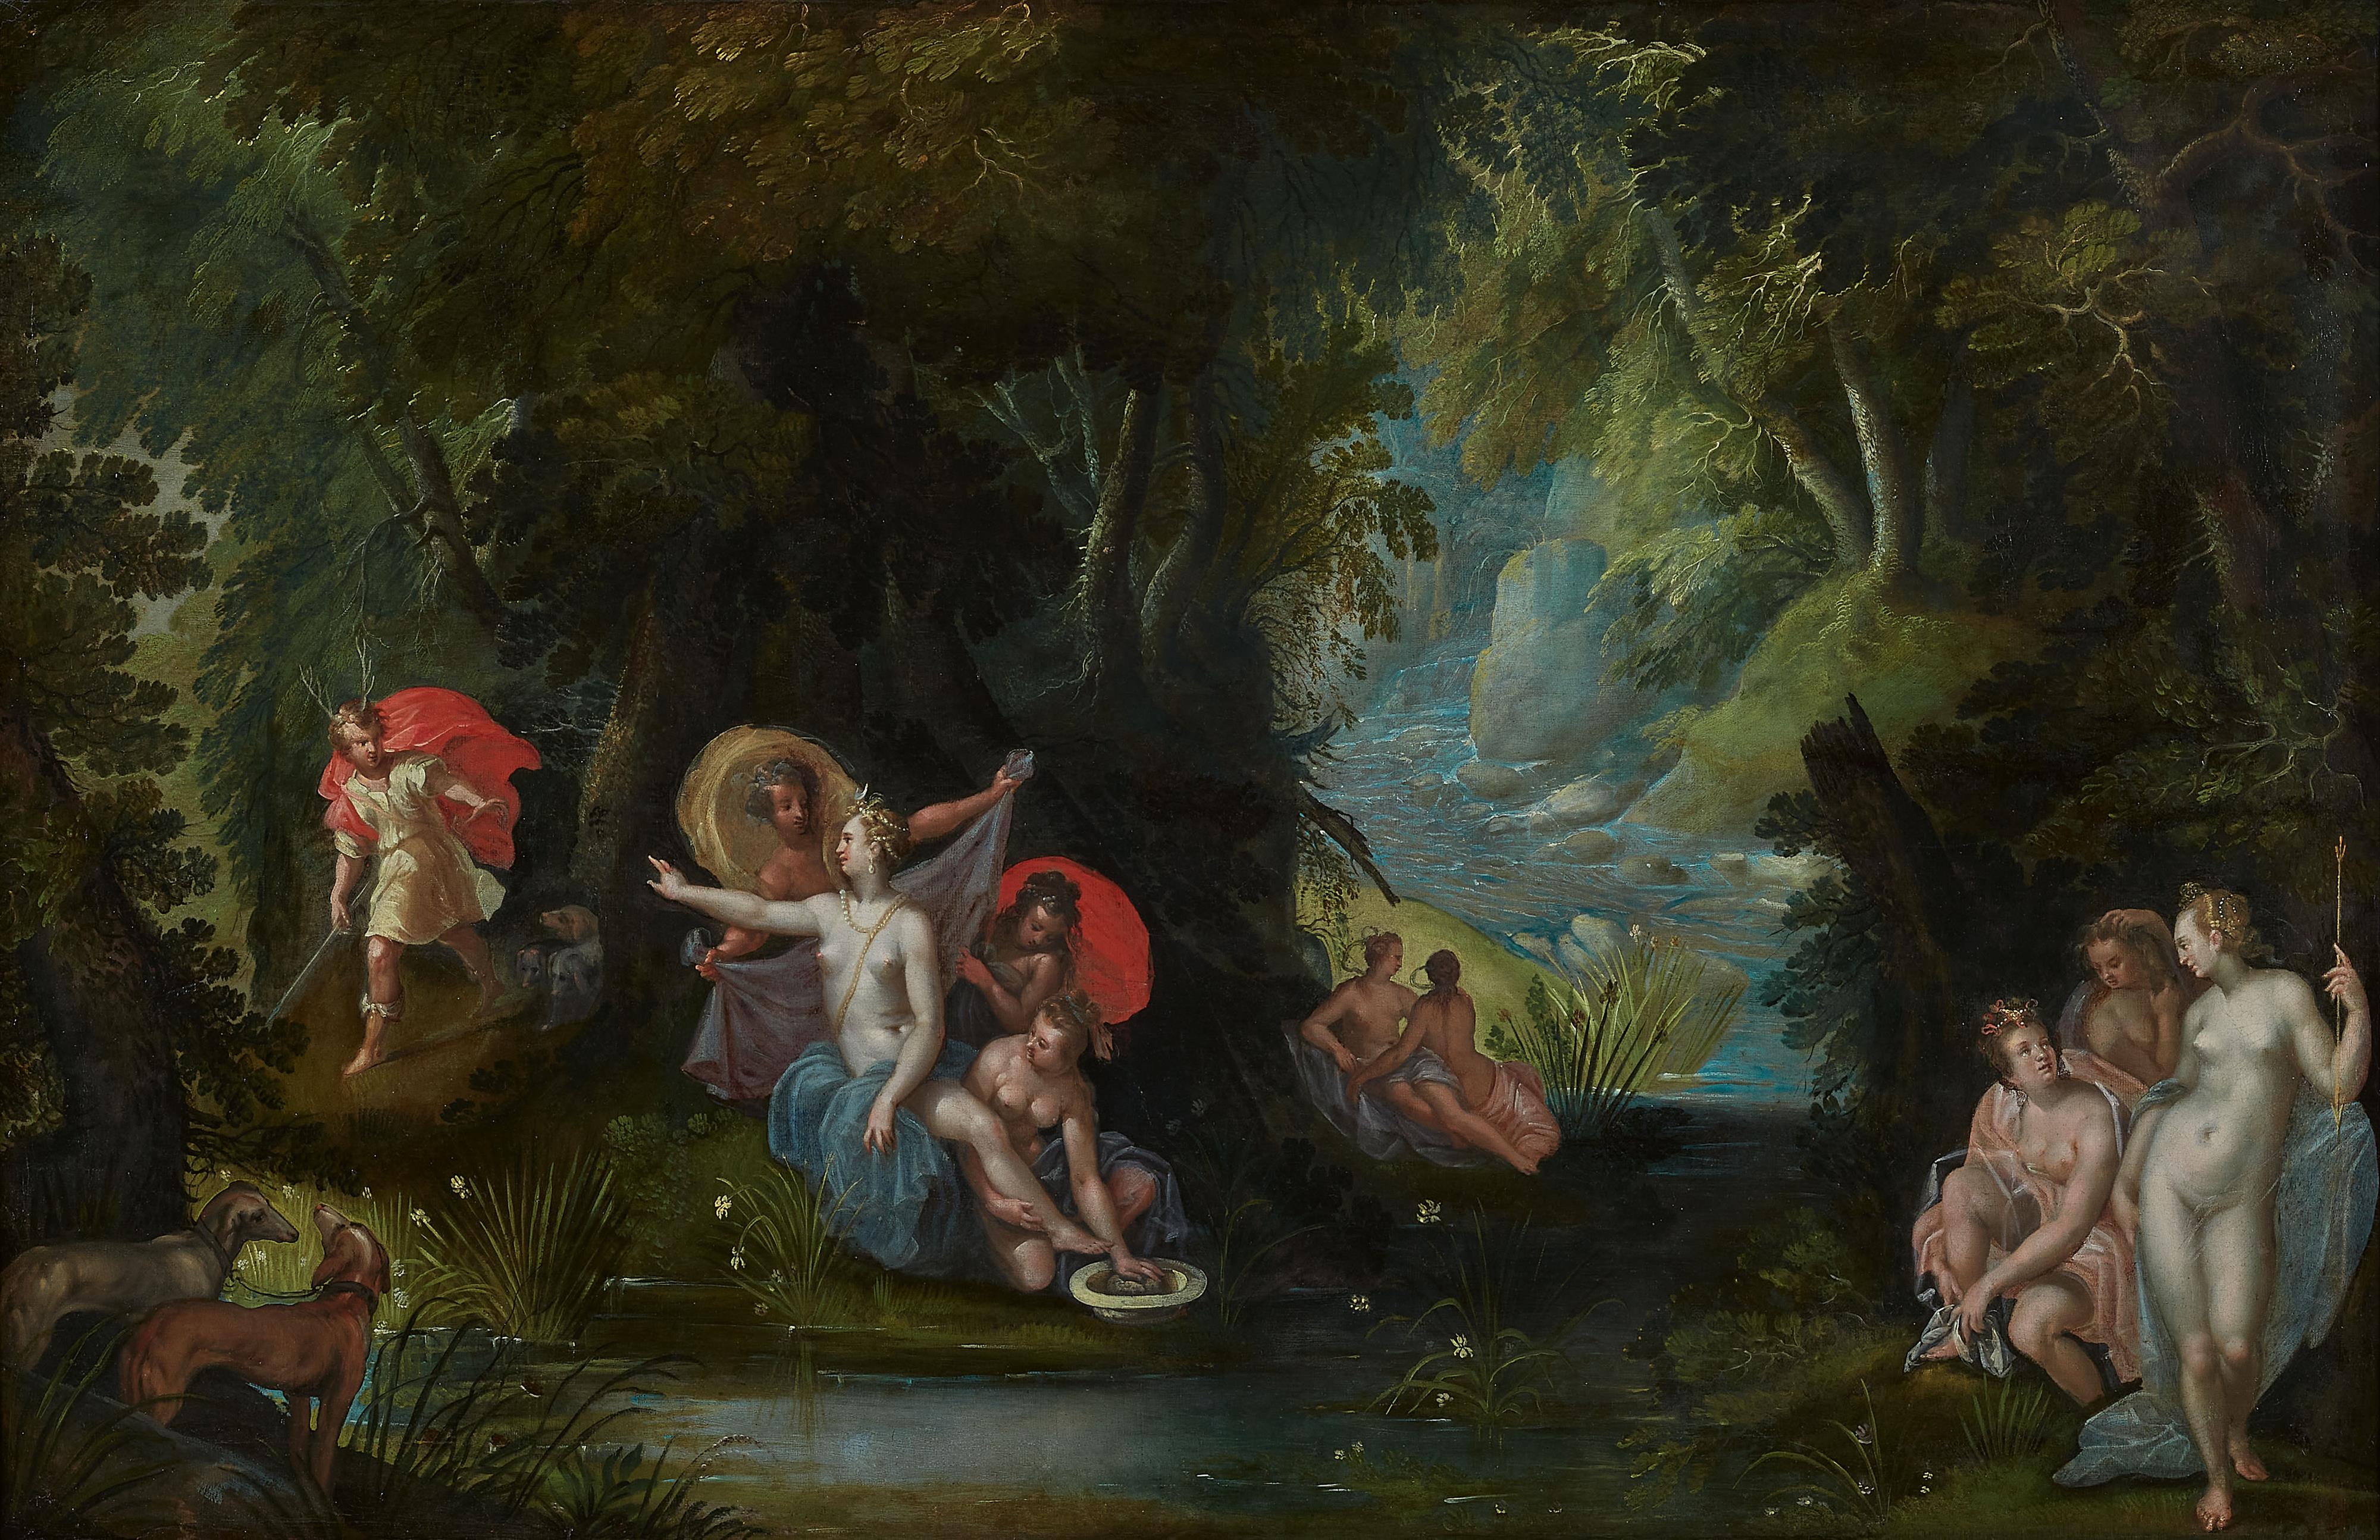 Flemish School Early 17th century - Diana and Actaeon - image-1